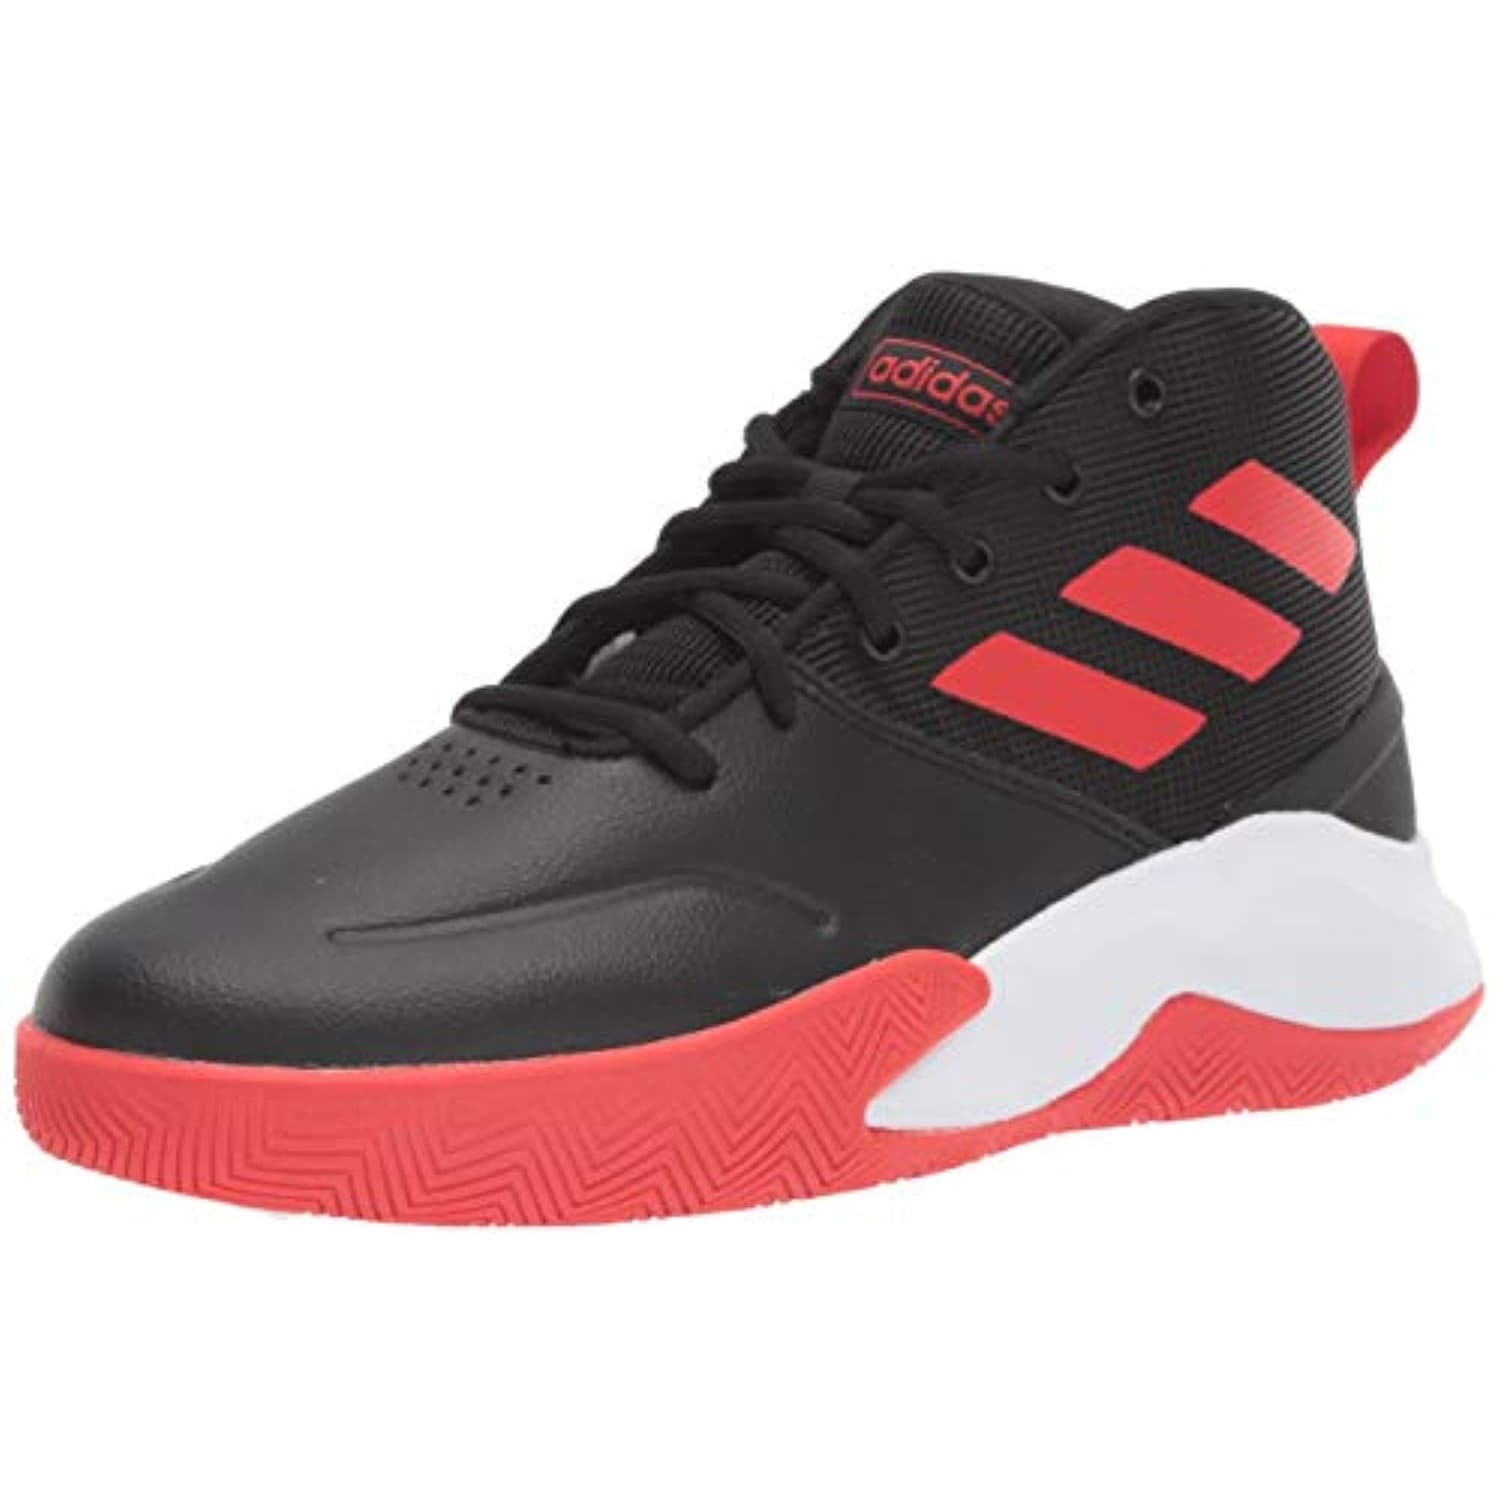 black and red adidas basketball shoes